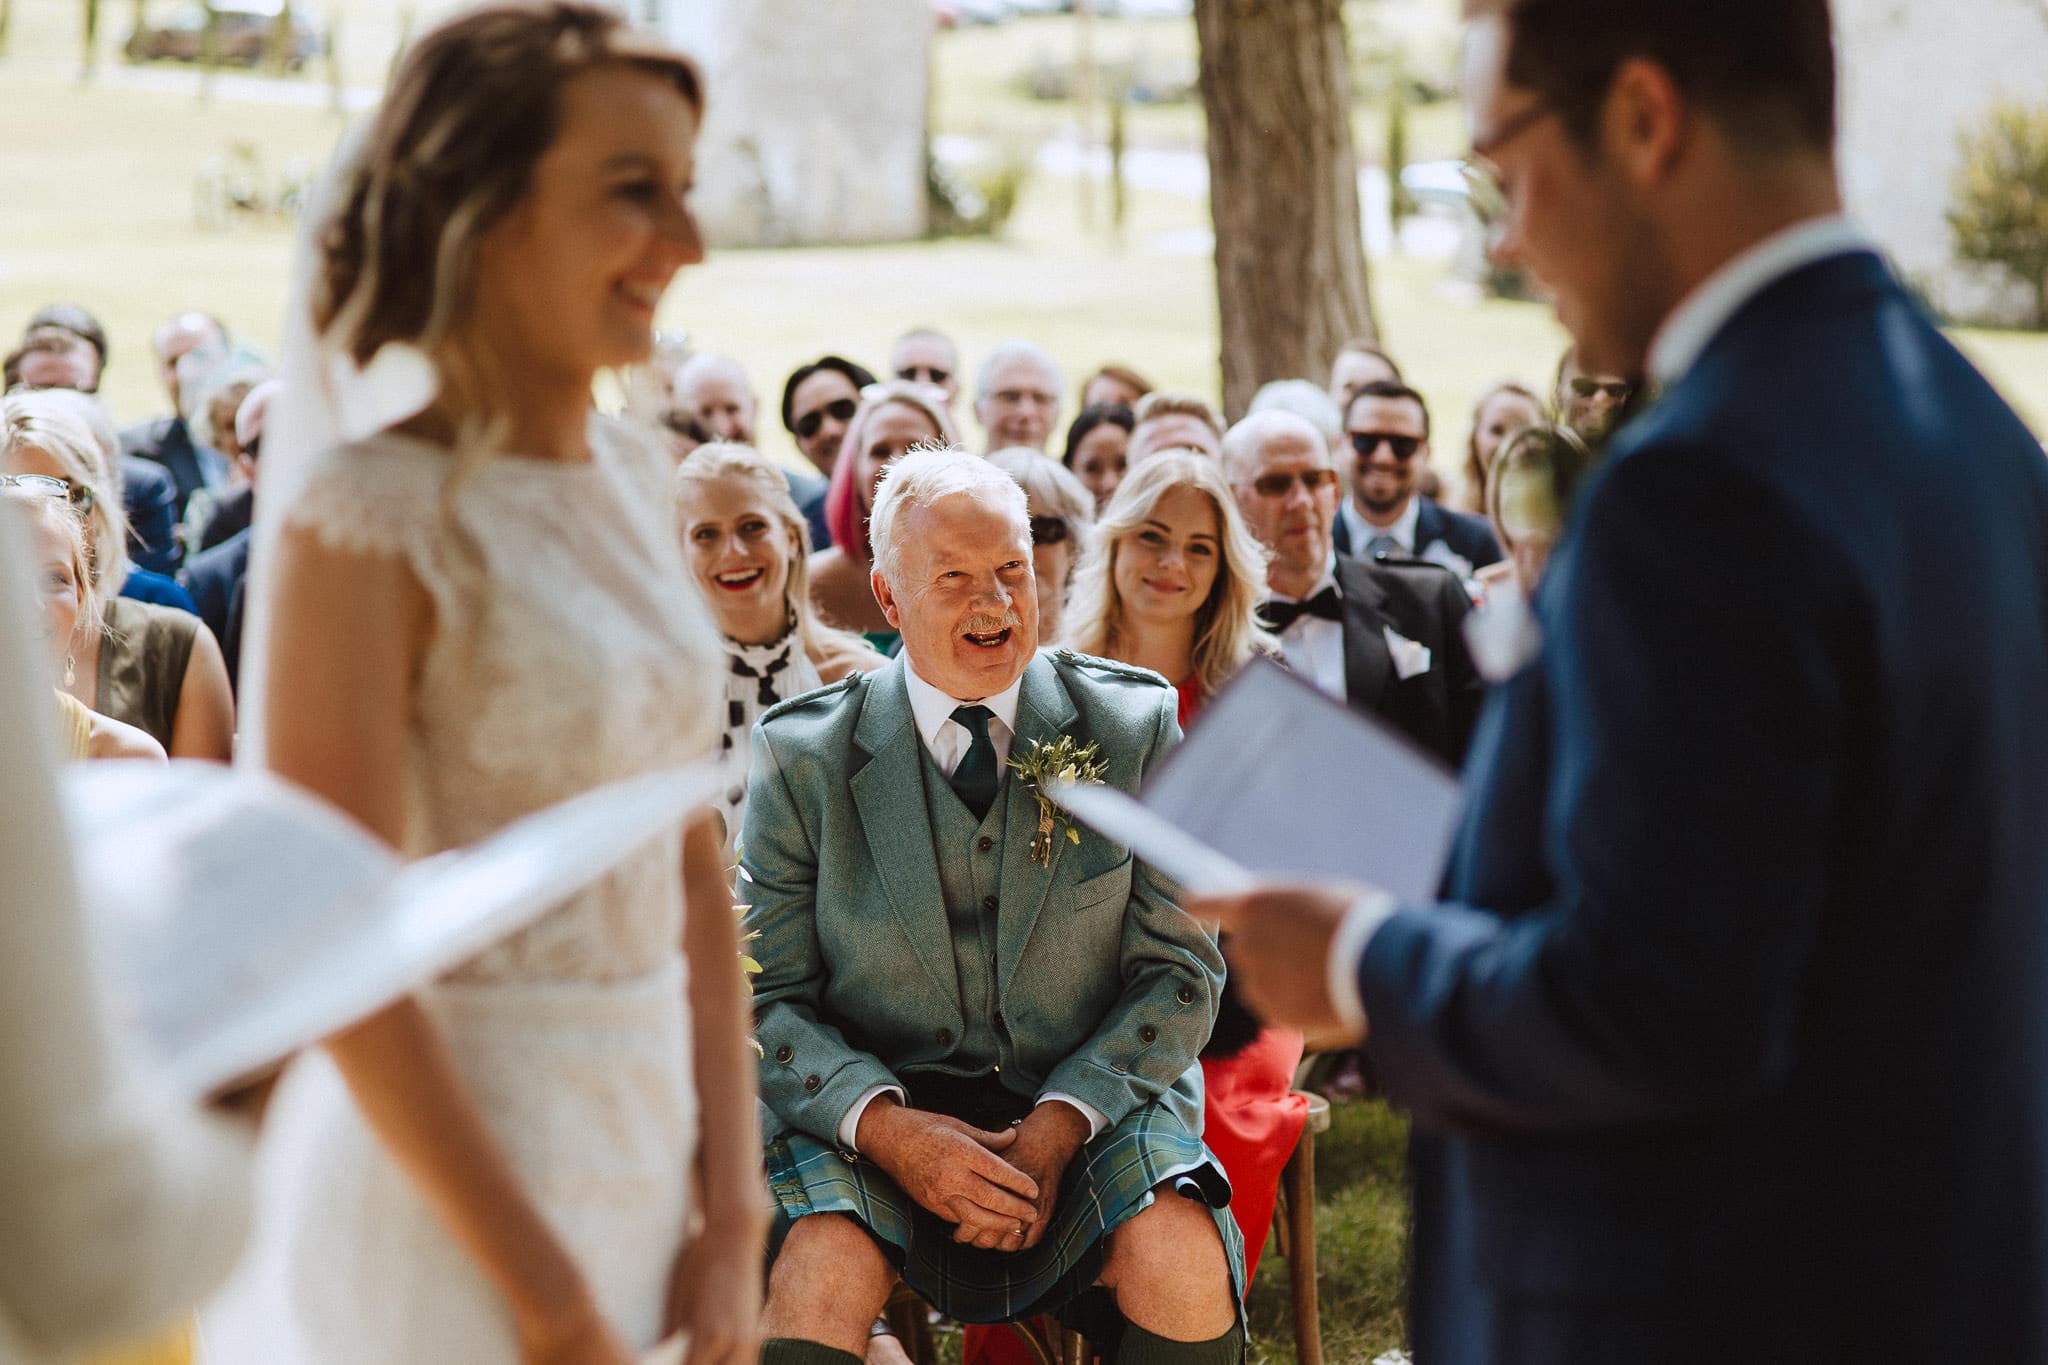 Scottish Father of the bride laughing during wedding vows